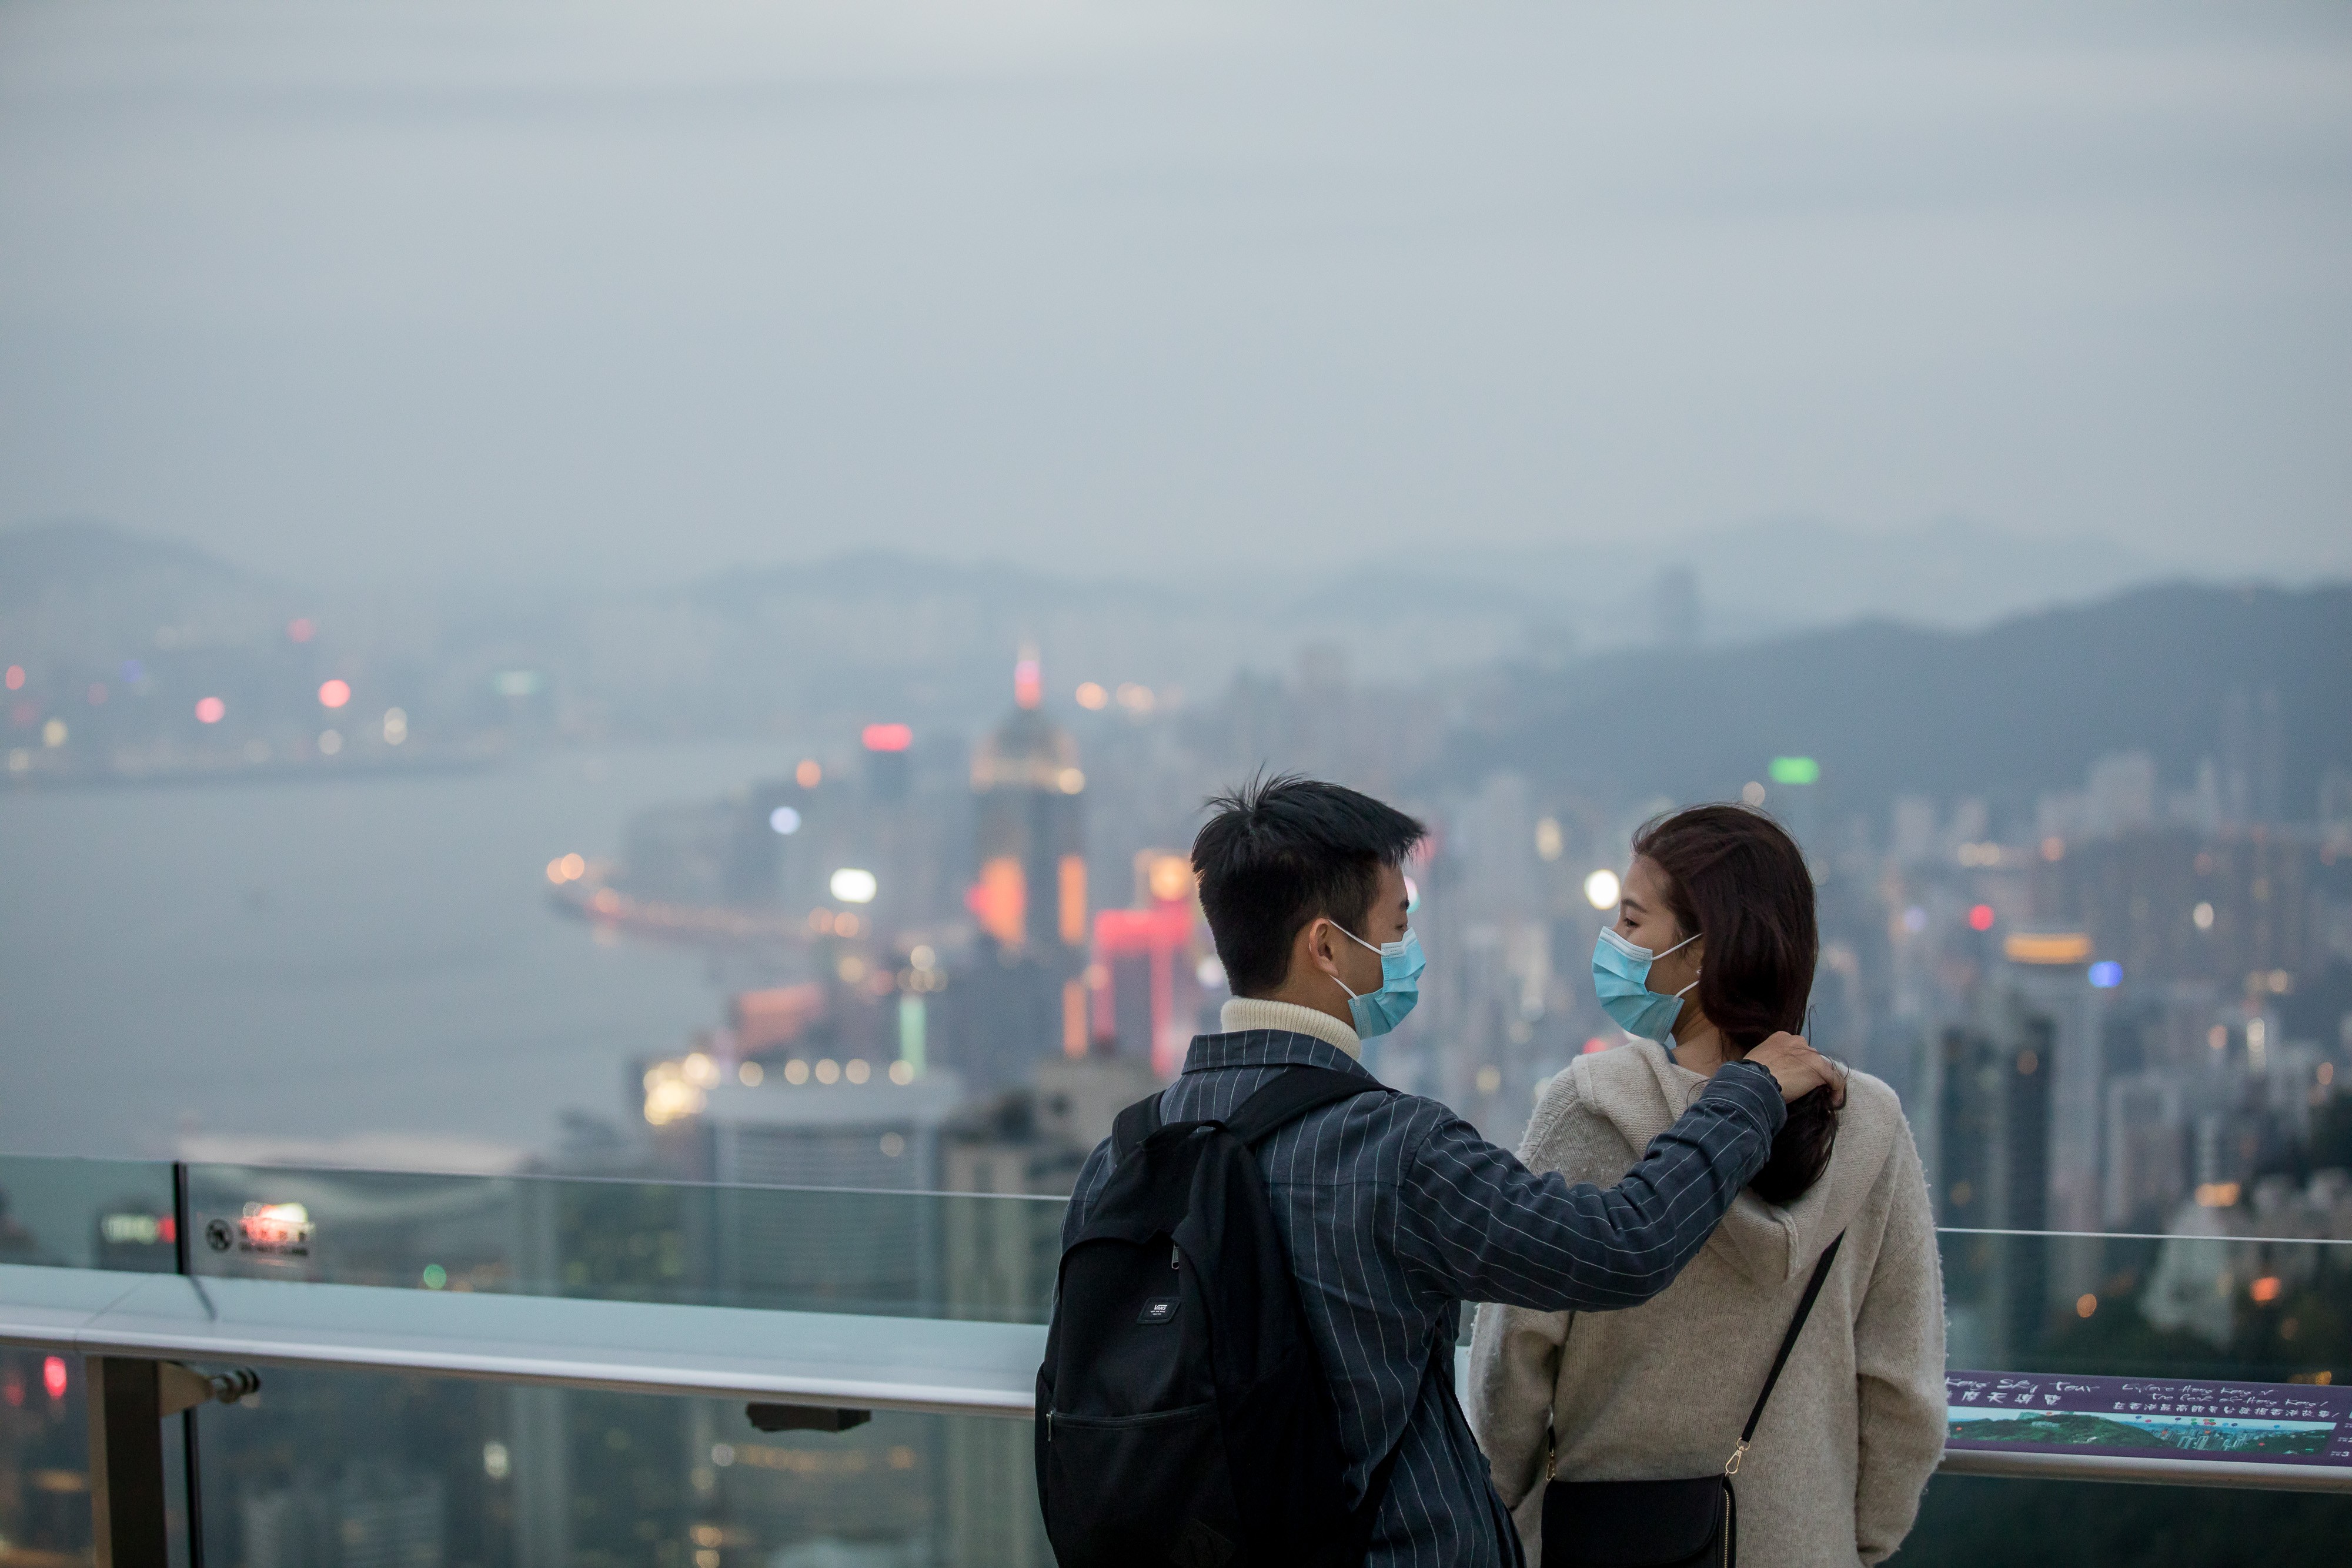 People wearing protective masks stand on a viewing terrace at Victoria Peak in Hong Kong on February 3. Hong Kong needs strong community bonds, including those between the government and people, to survive the coronavirus and other crises. Photo: Bloomberg